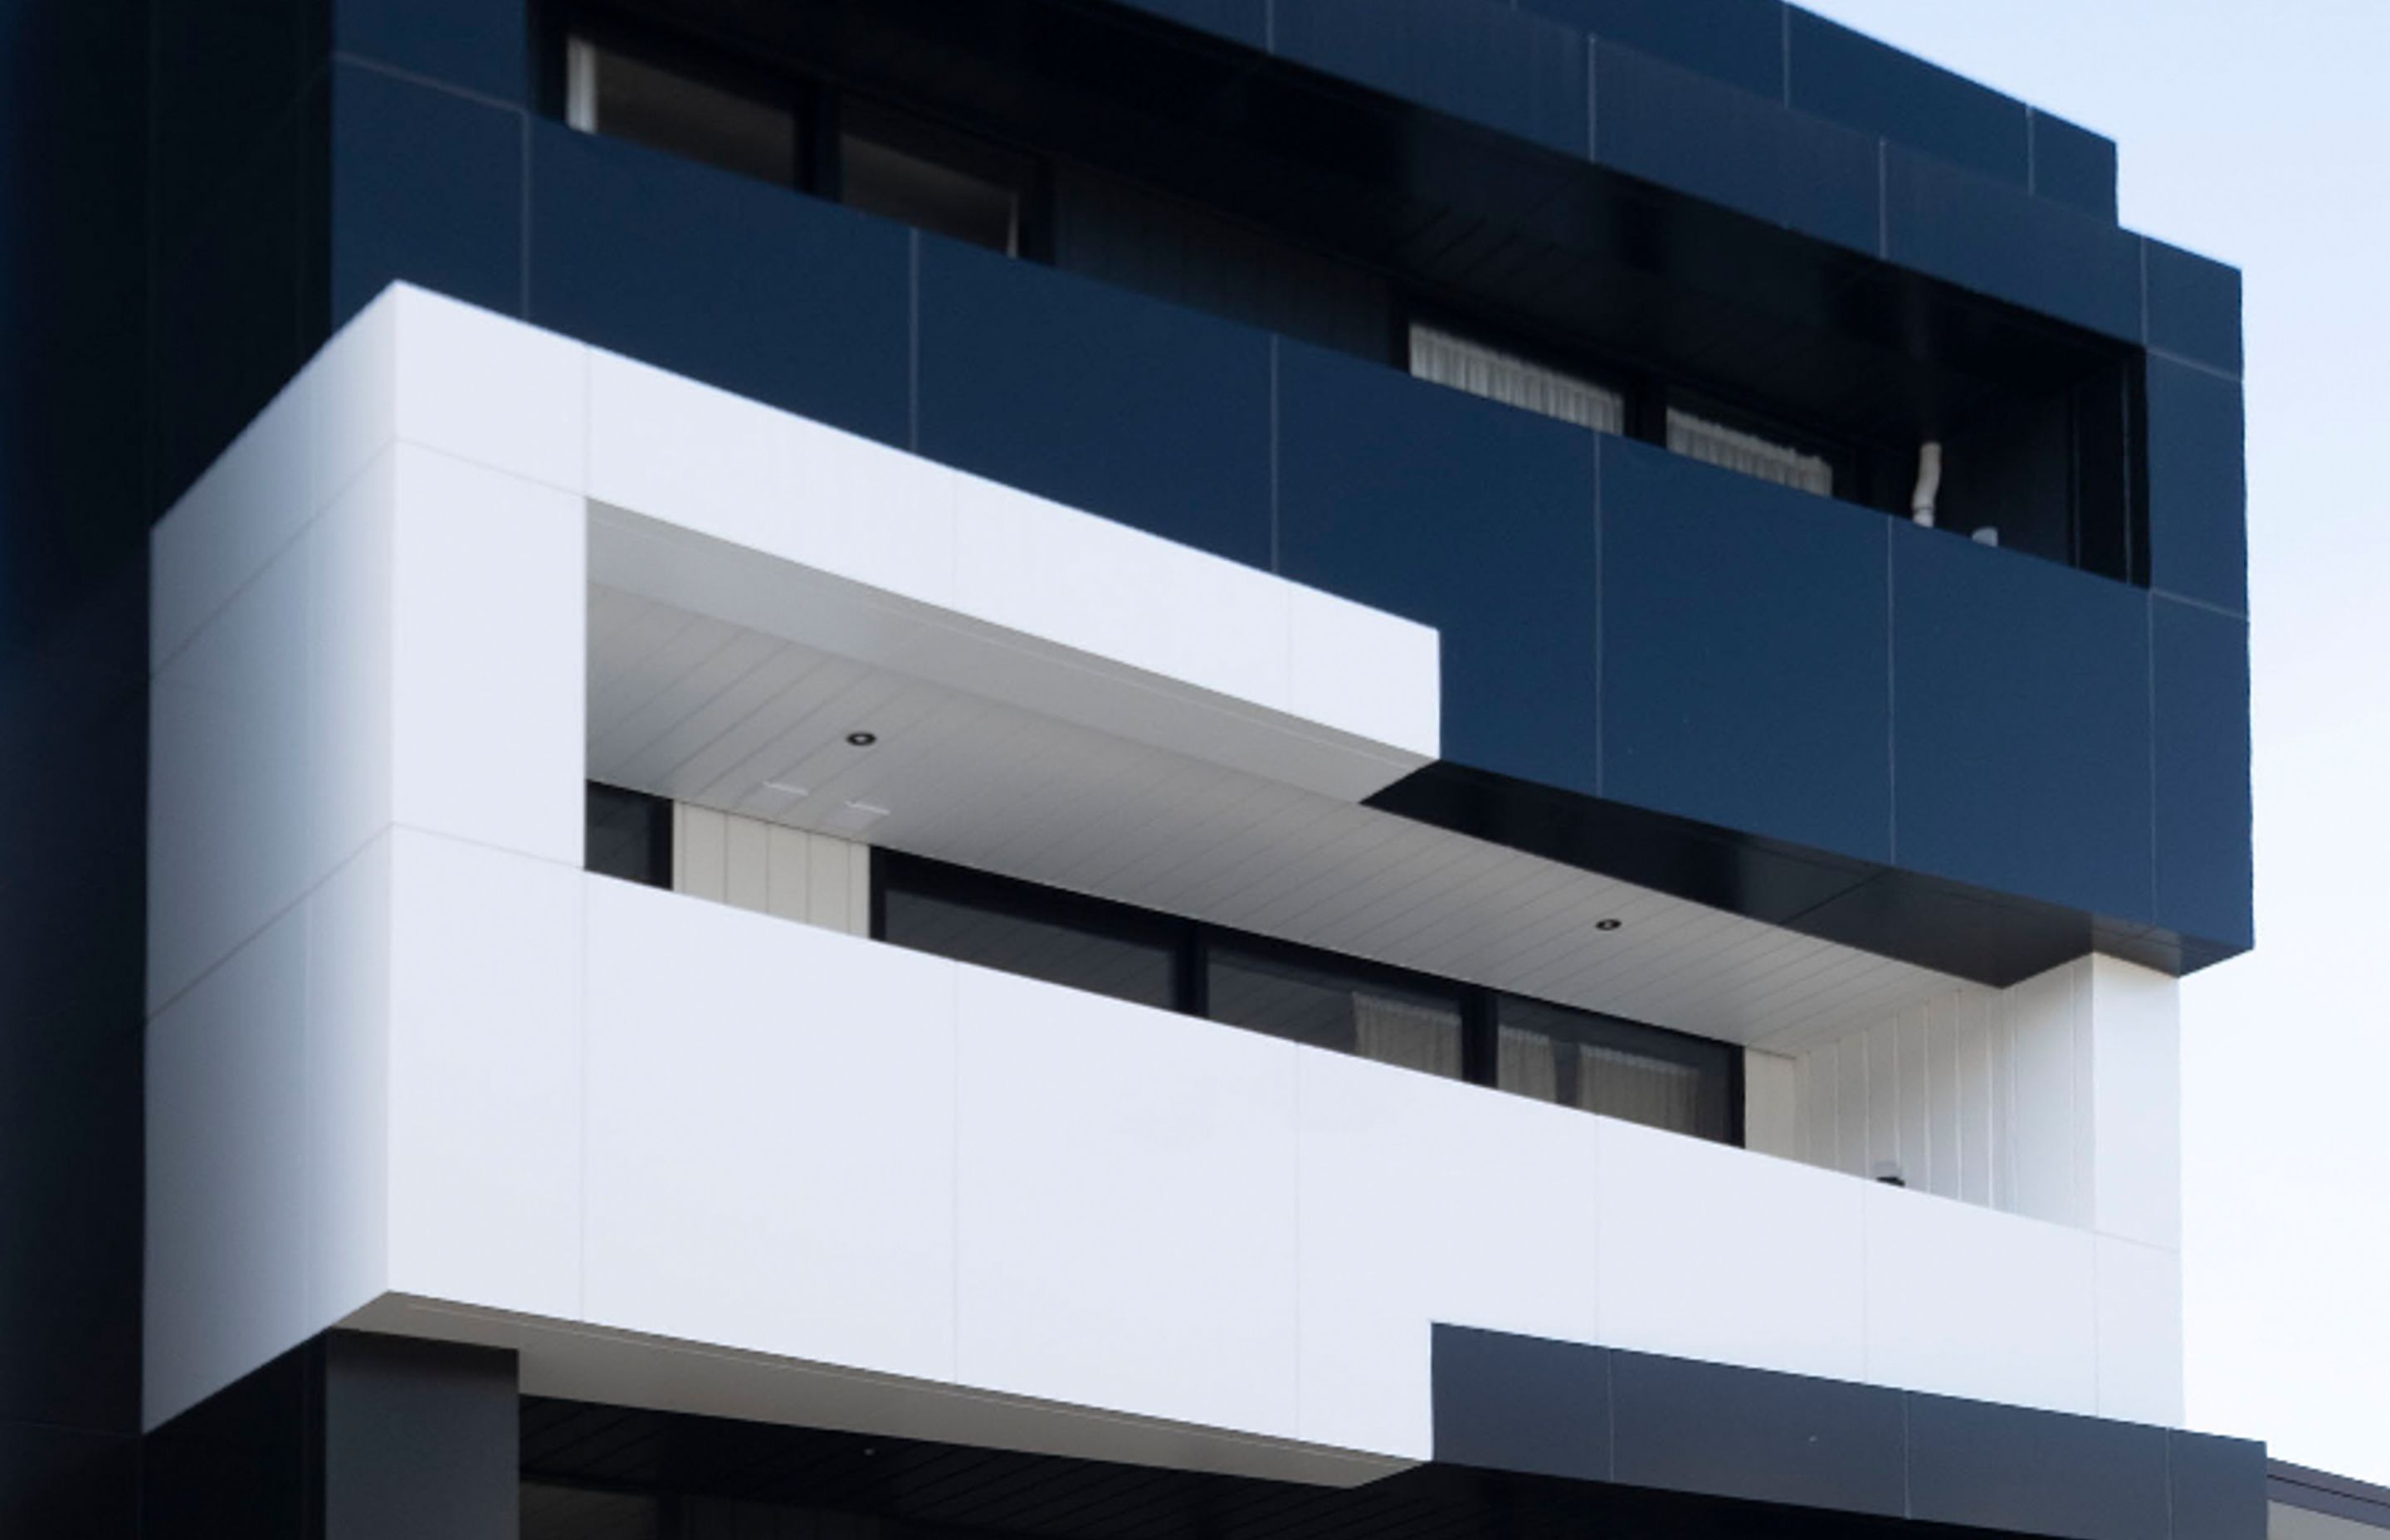 Panelux Solid Aluminium, seen here in black and white options on the Blake St Apartments, Ponsonby, is non-combustible and fully compliant with the NZBC for all commercial, industrial, residential and high rise construction.